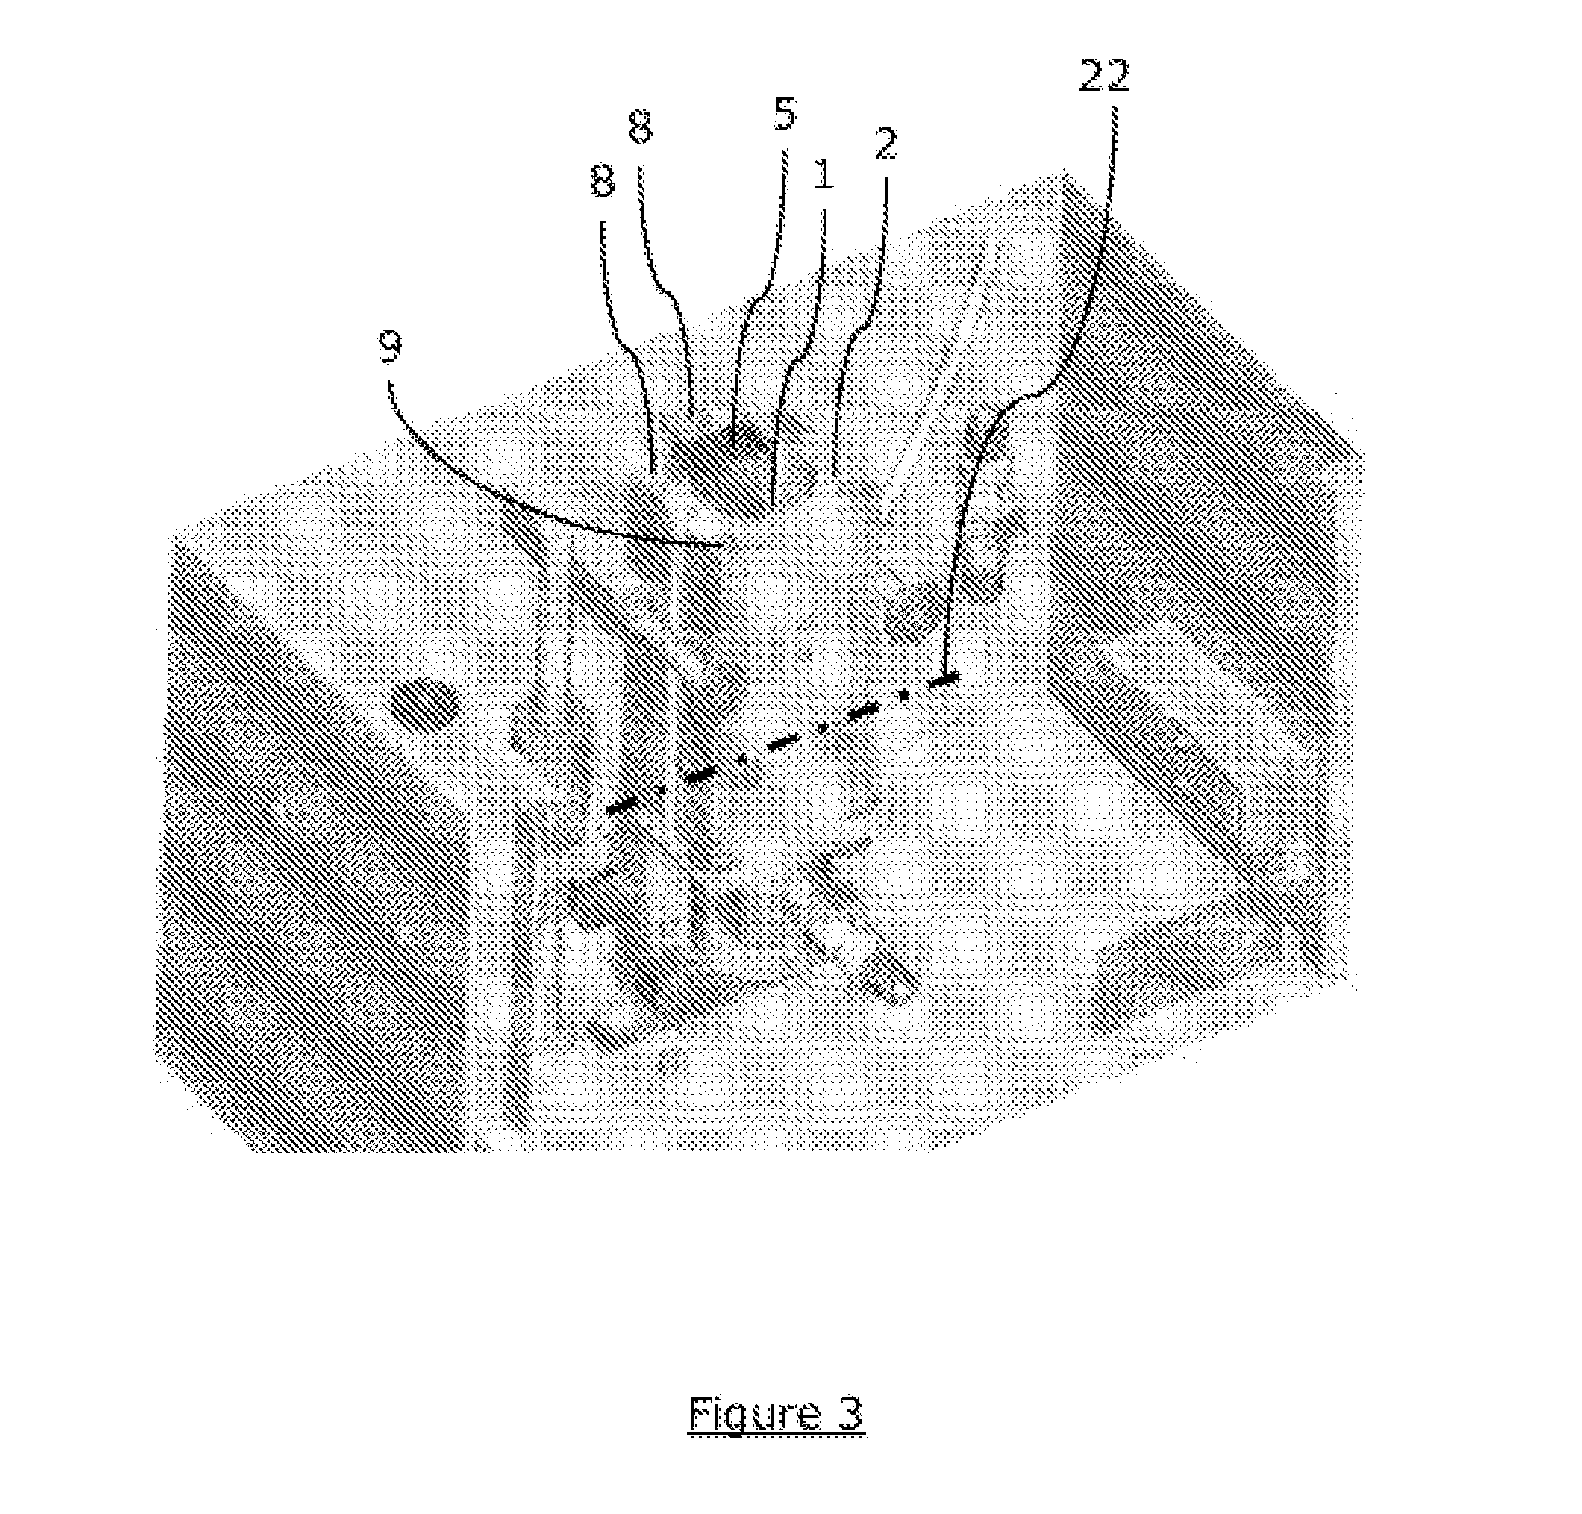 Cooled pulsed light treatment device